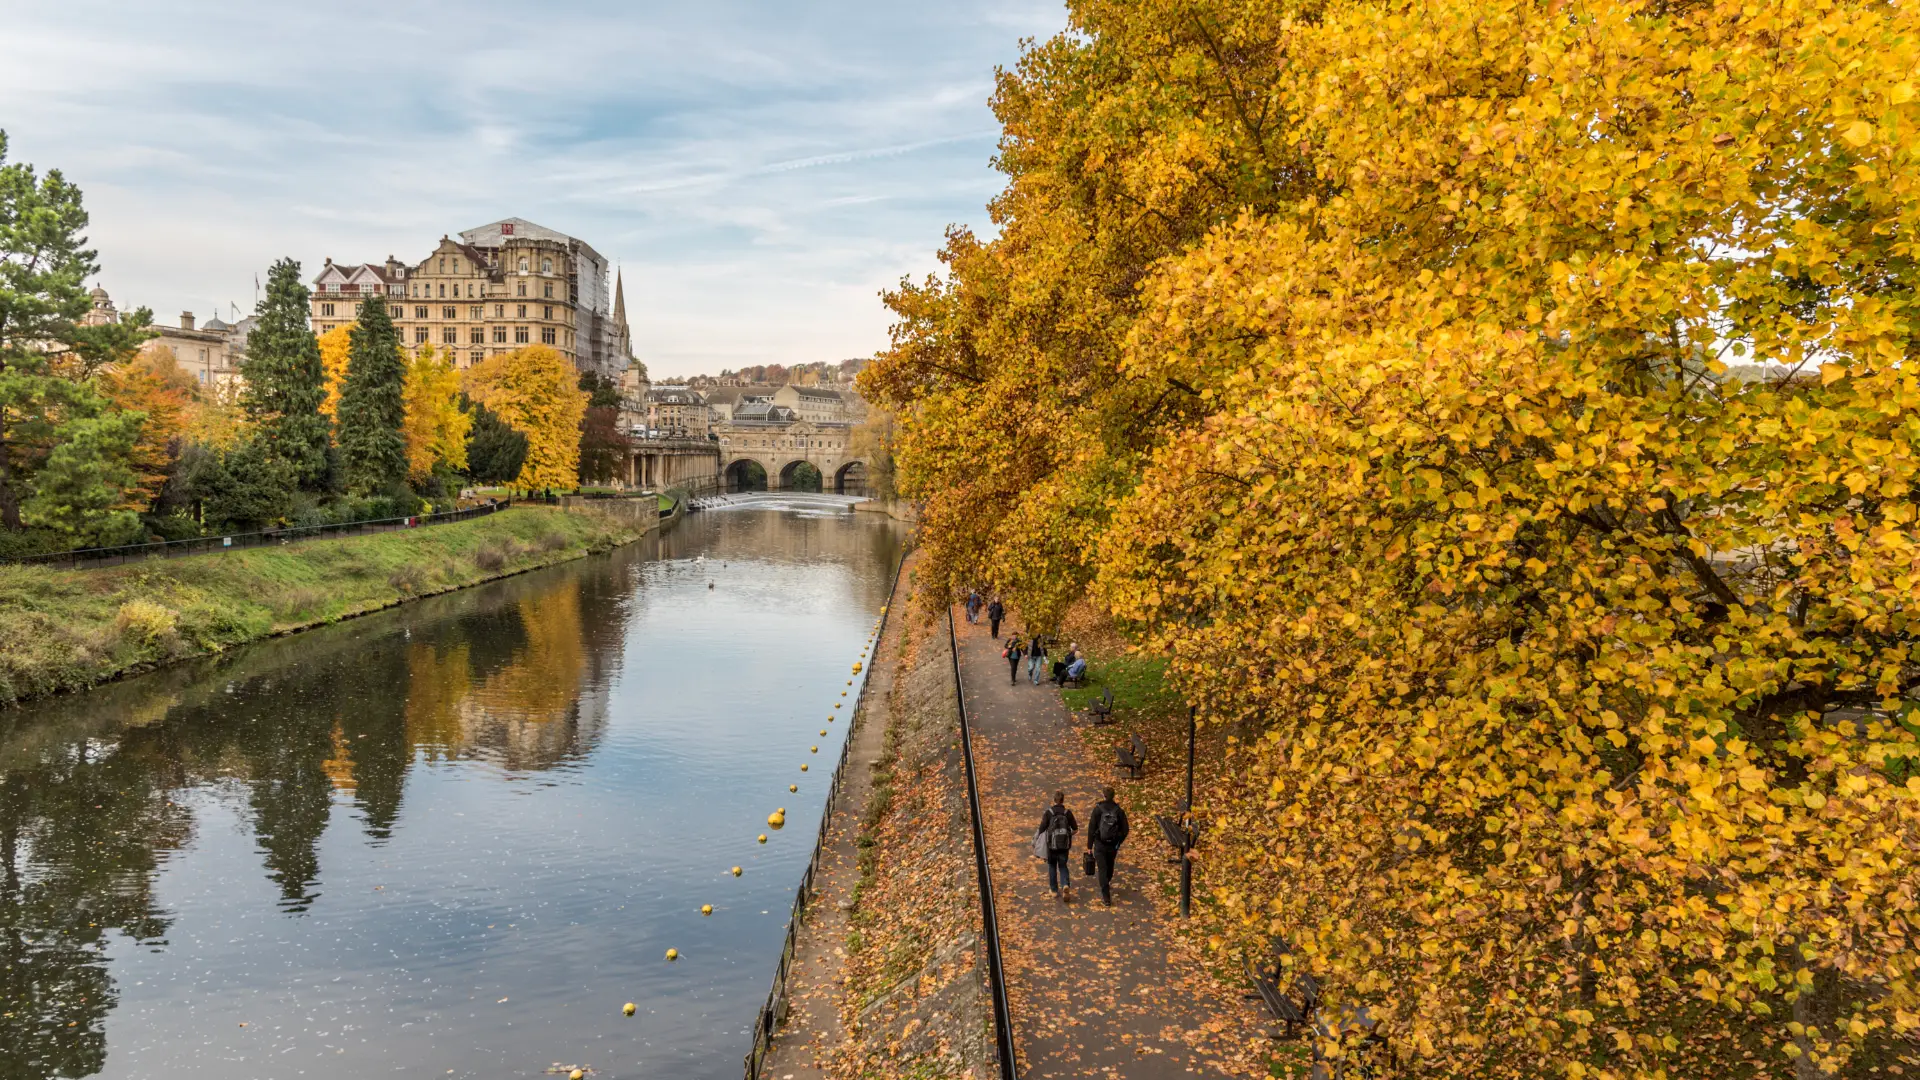 Autumn scene showing people walking along a tree-lined river path, with vibrant yellow foliage, overlooking a historic stone bridge and grand buildings in the background.